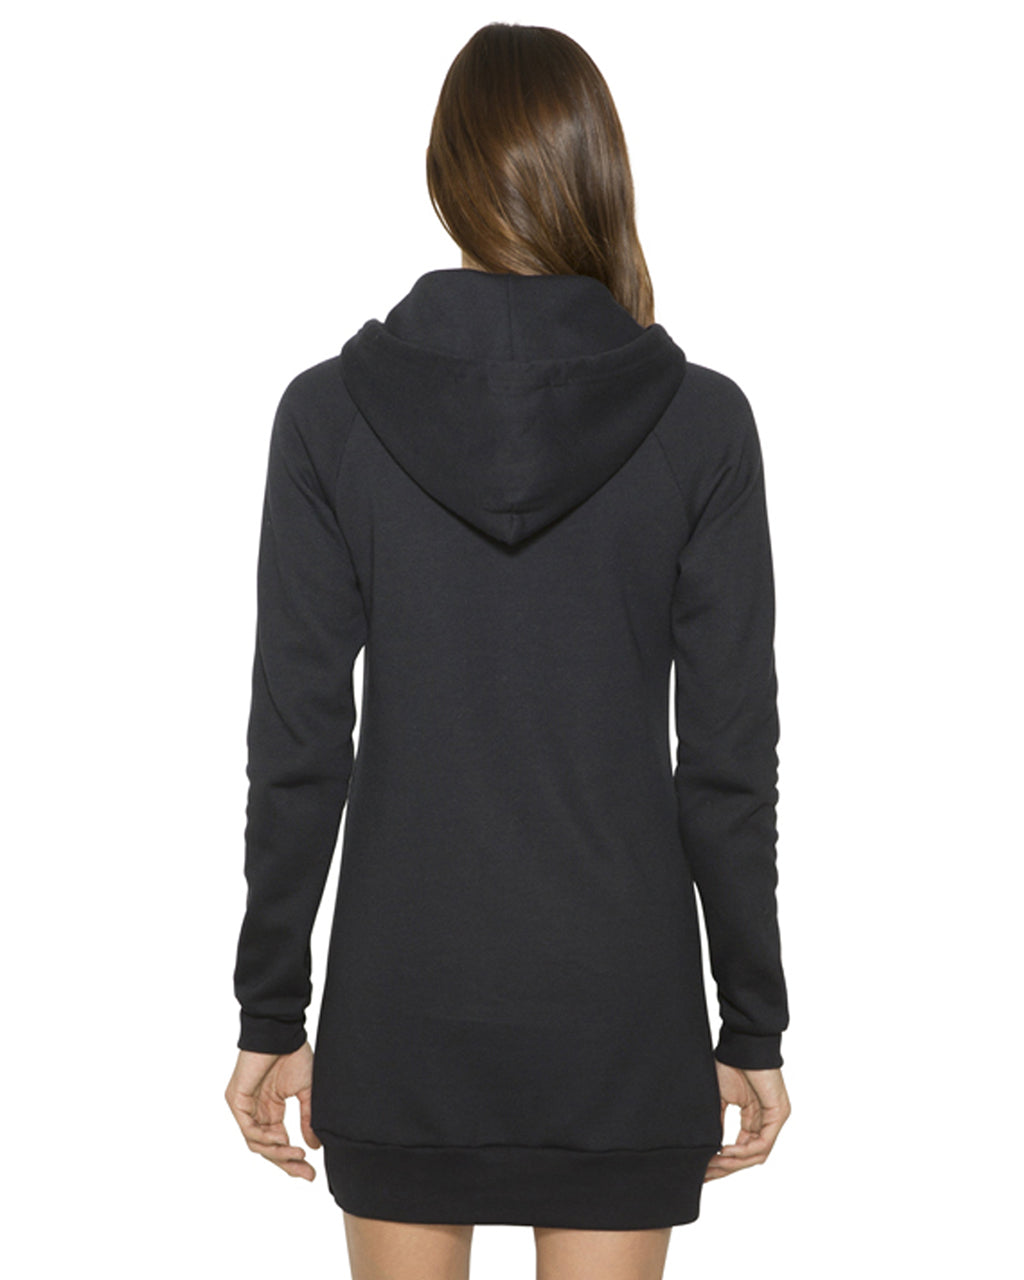 Embroidered GD Bolt on American Apparel Hooded Dress